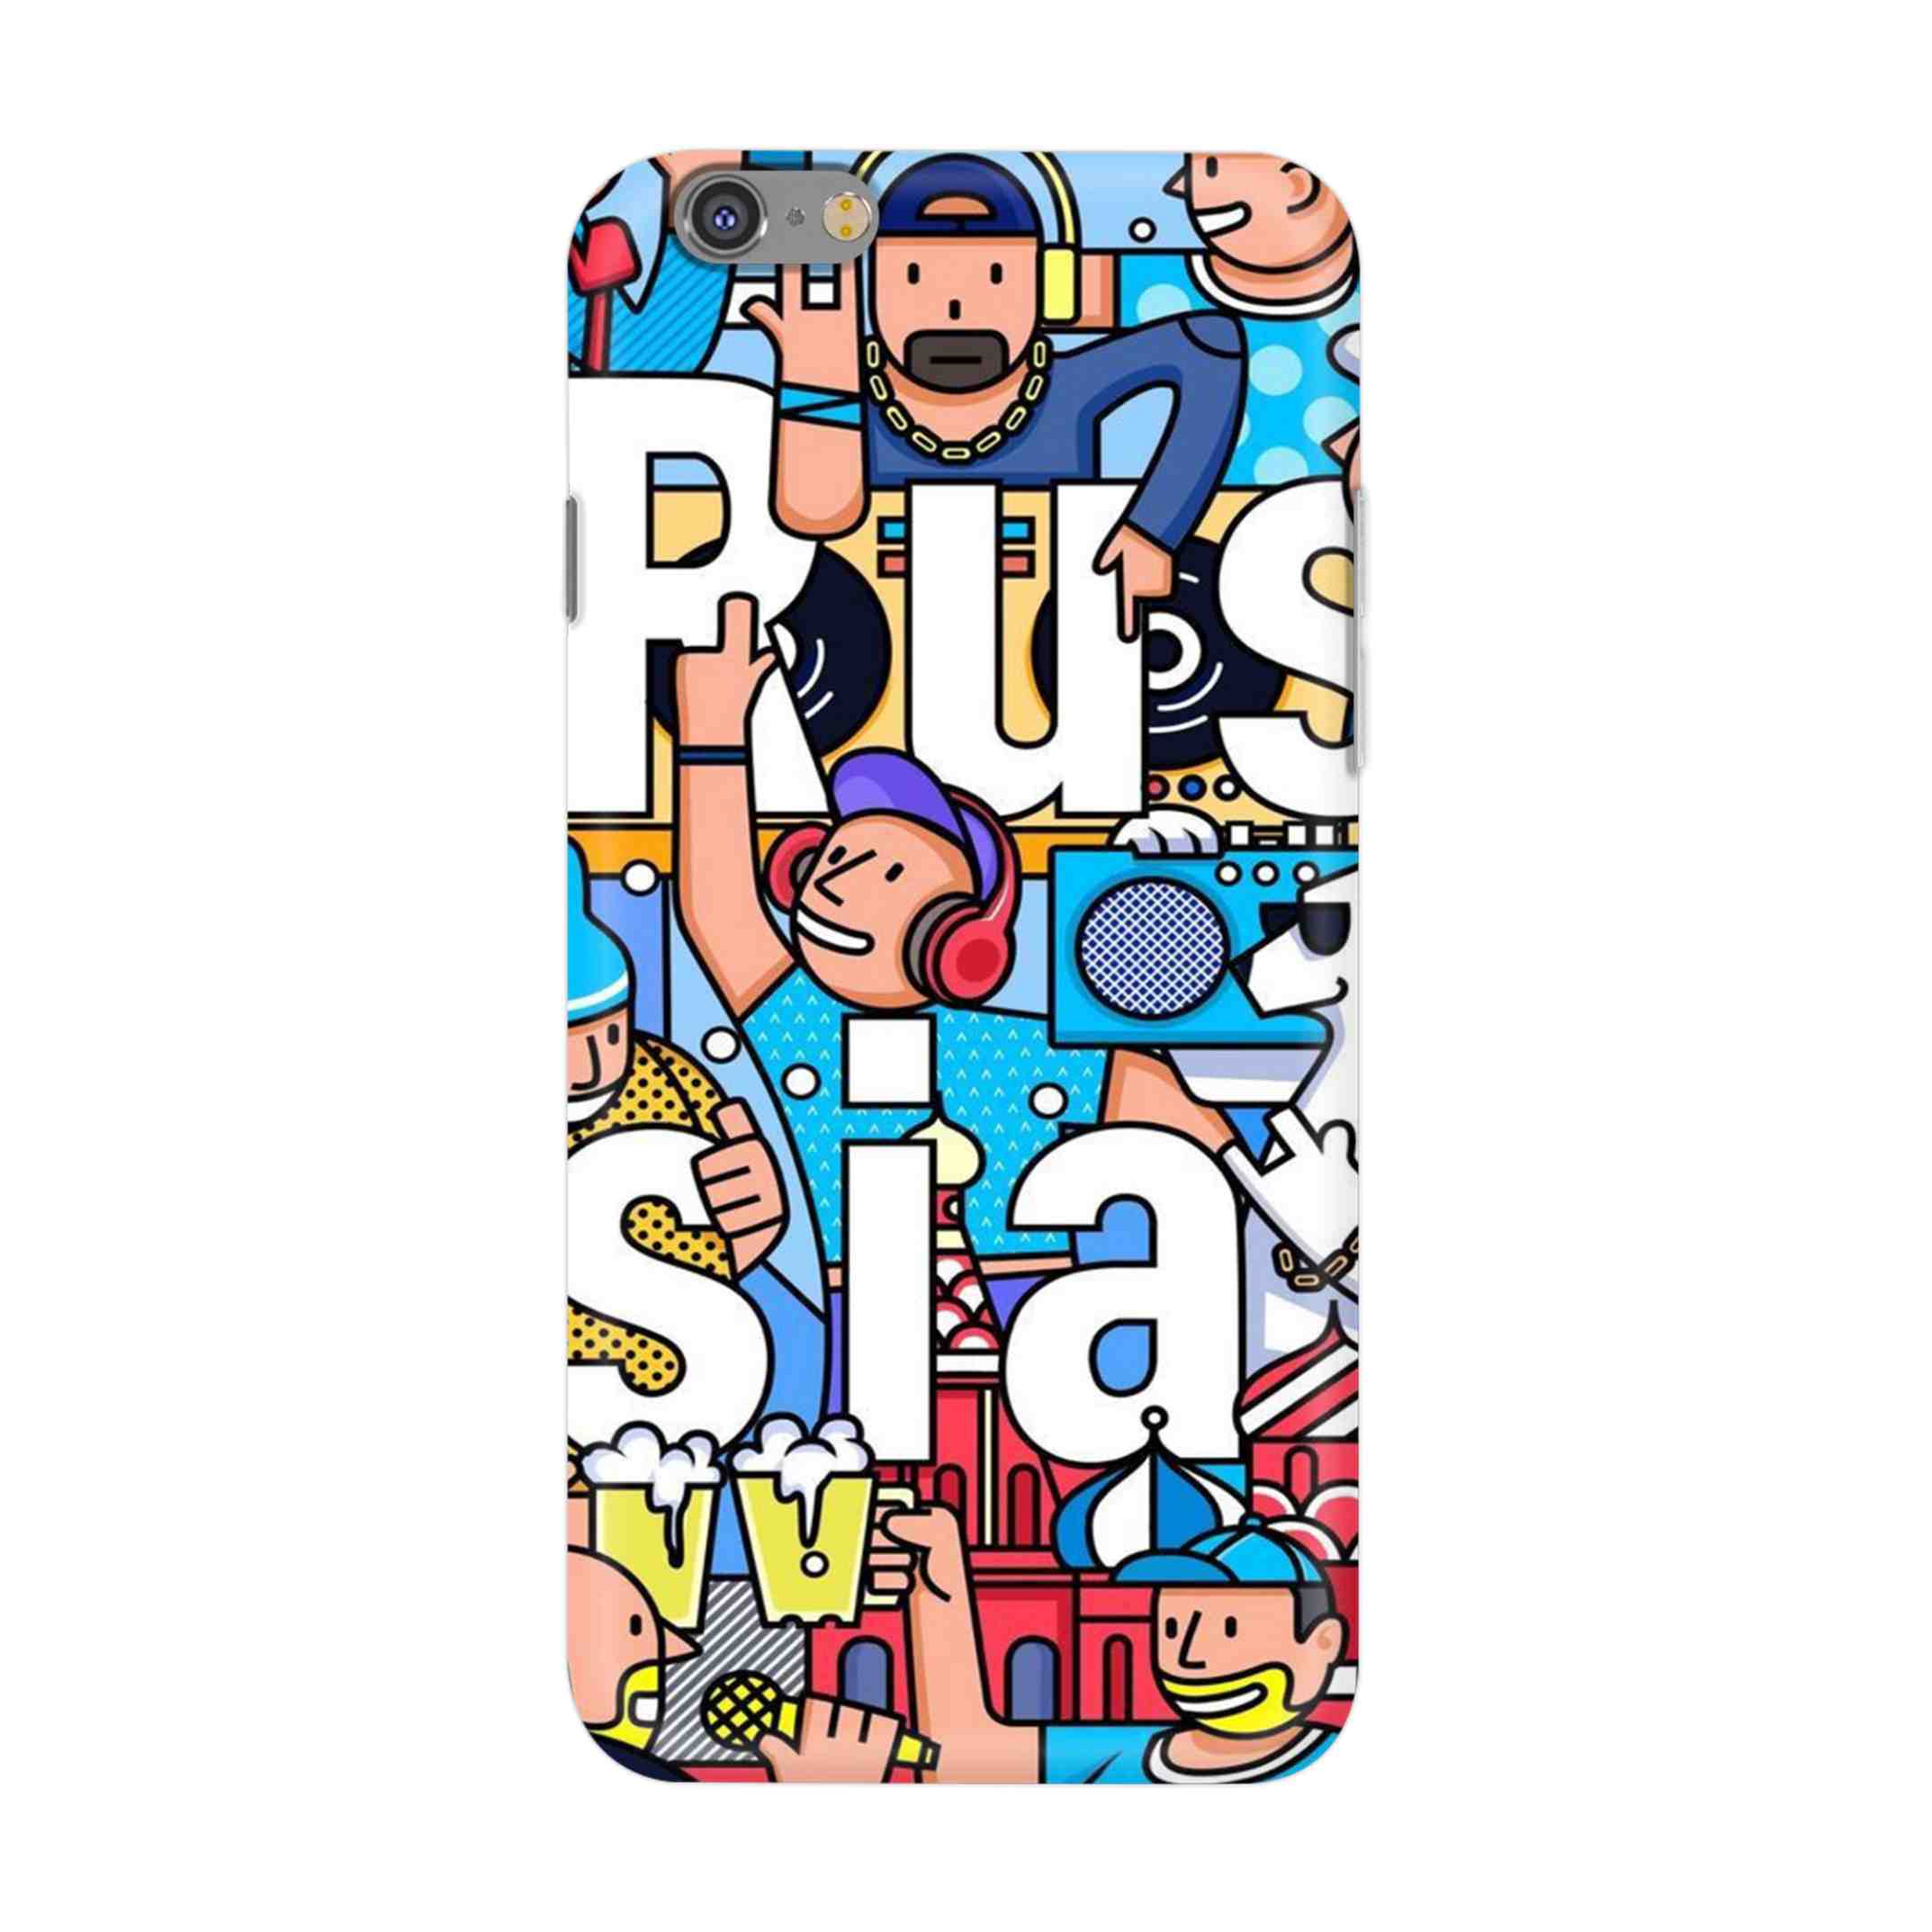 Buy Russia Hard Back Mobile Phone Case/Cover For iPhone 6 / 6s Online